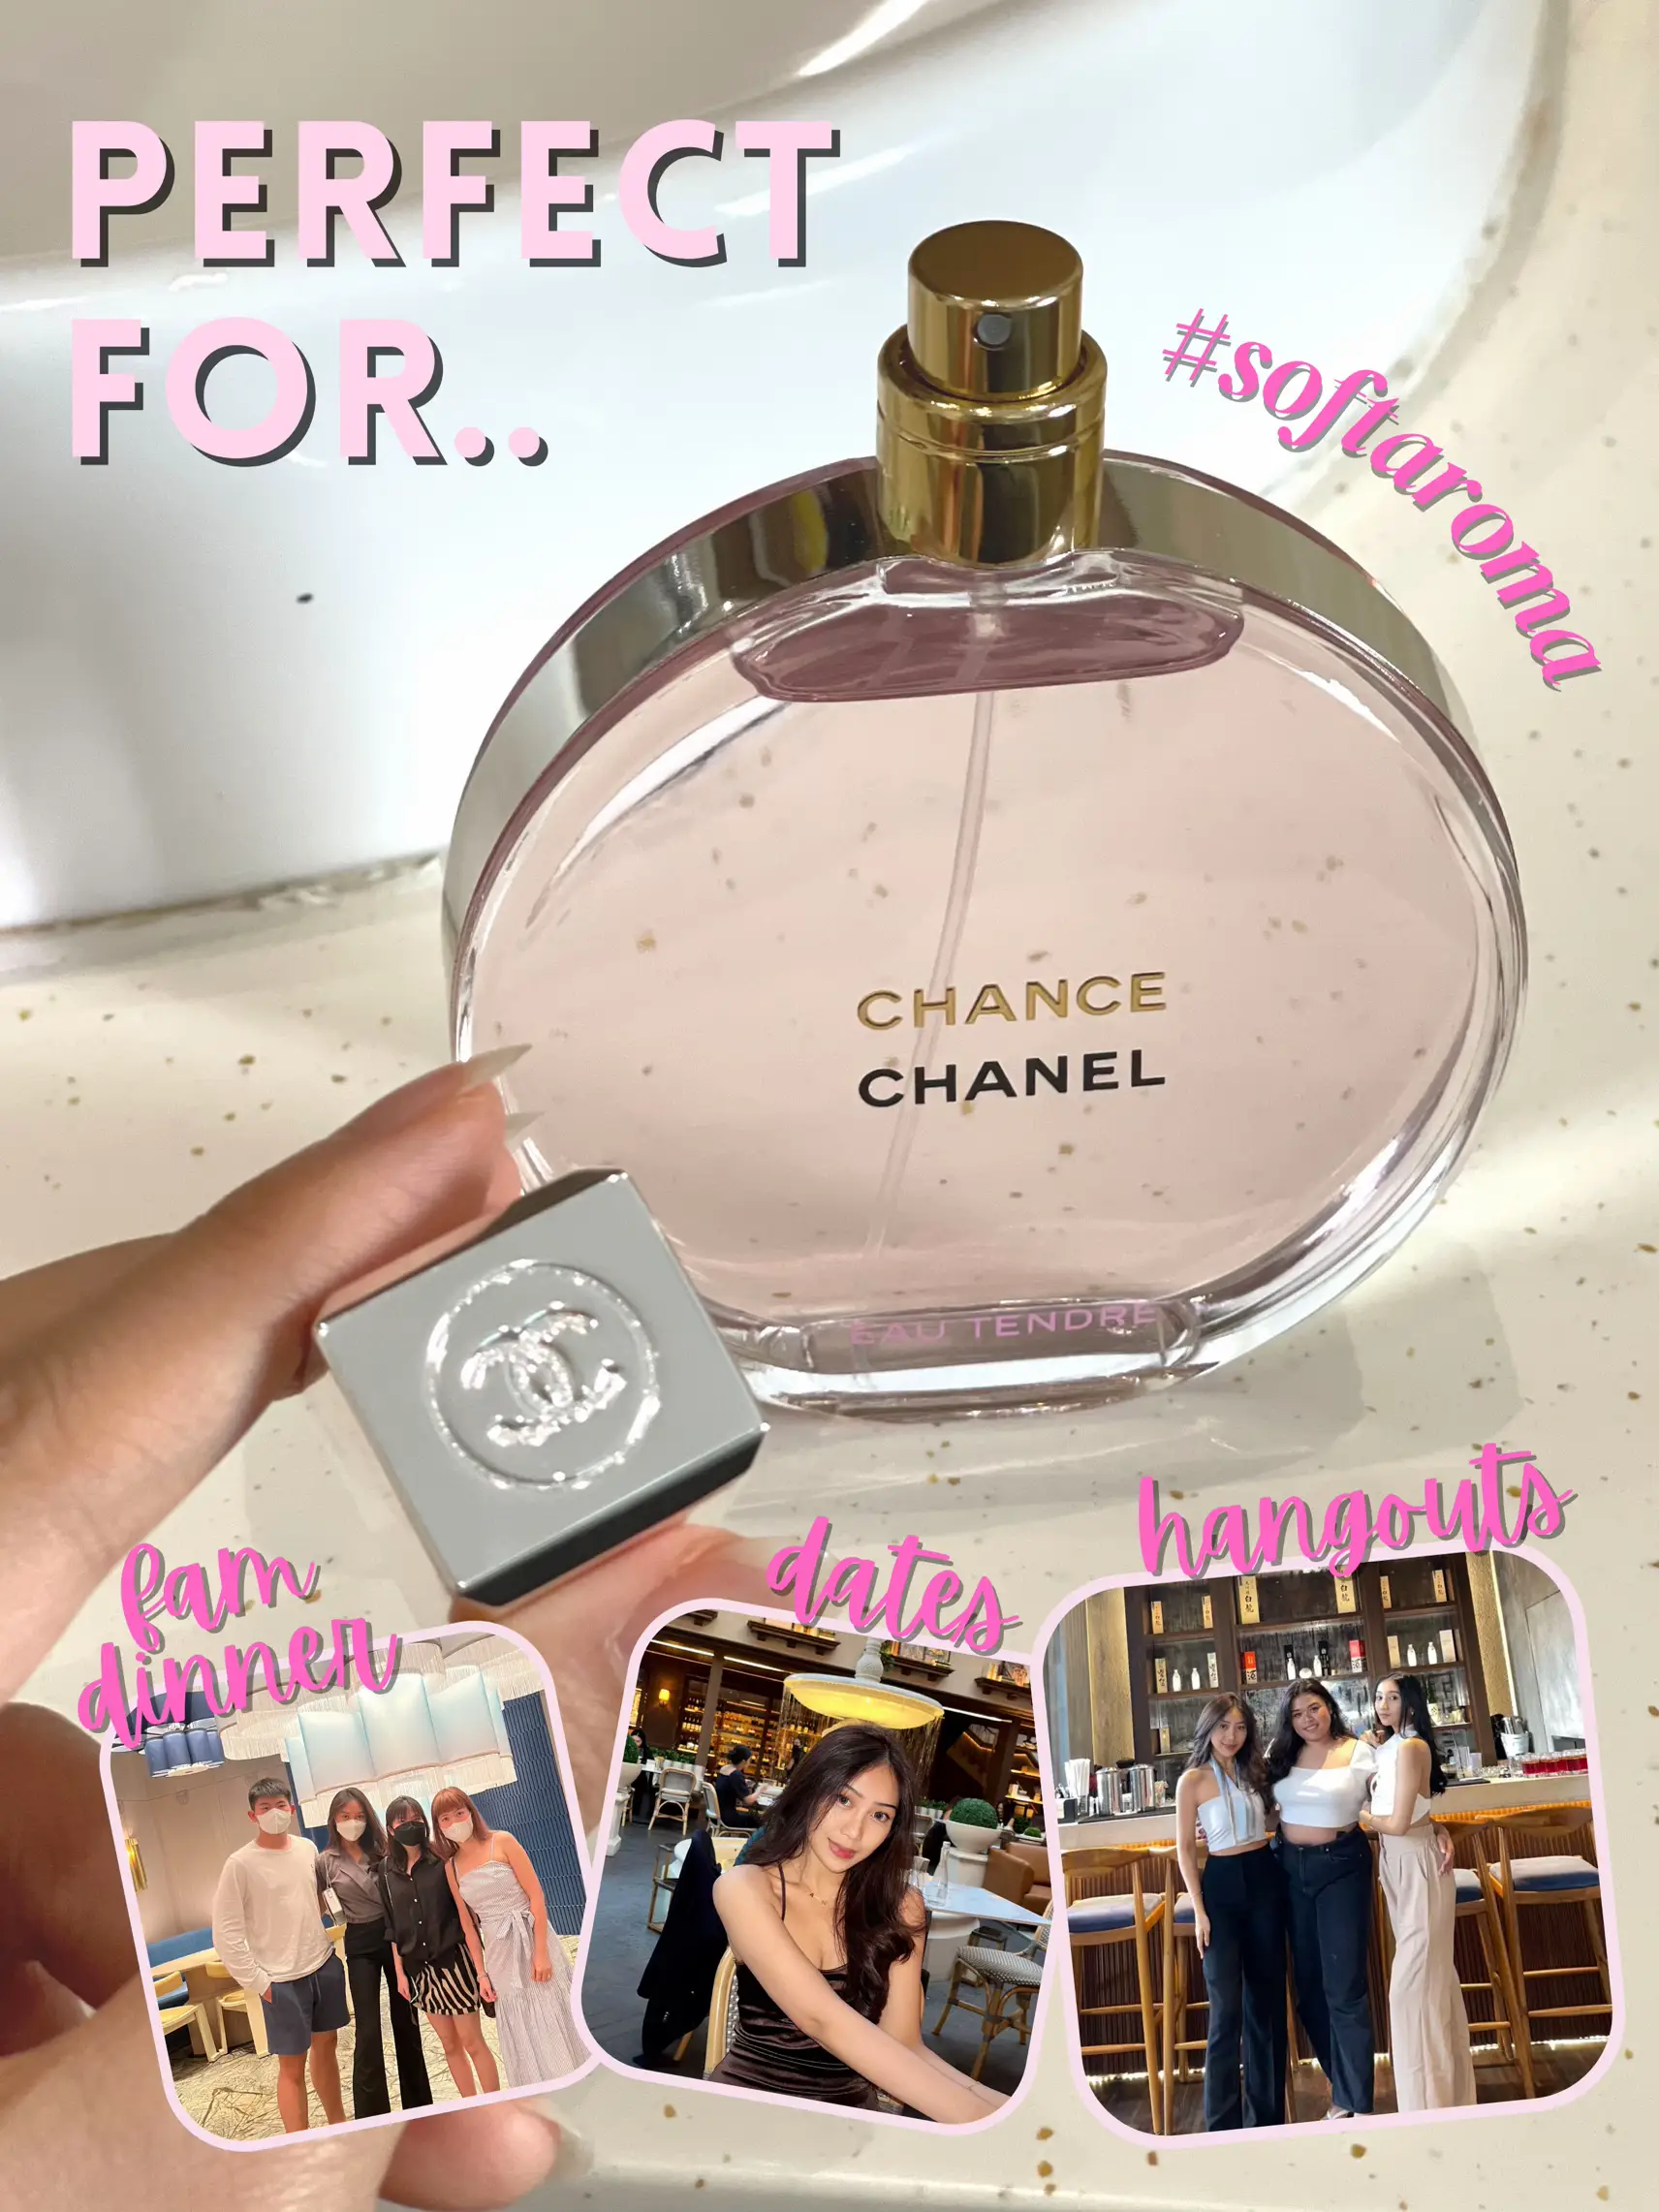 SOFT & FEMININE PERFUME BY CHANEL, Gallery posted by Ana Hariawan